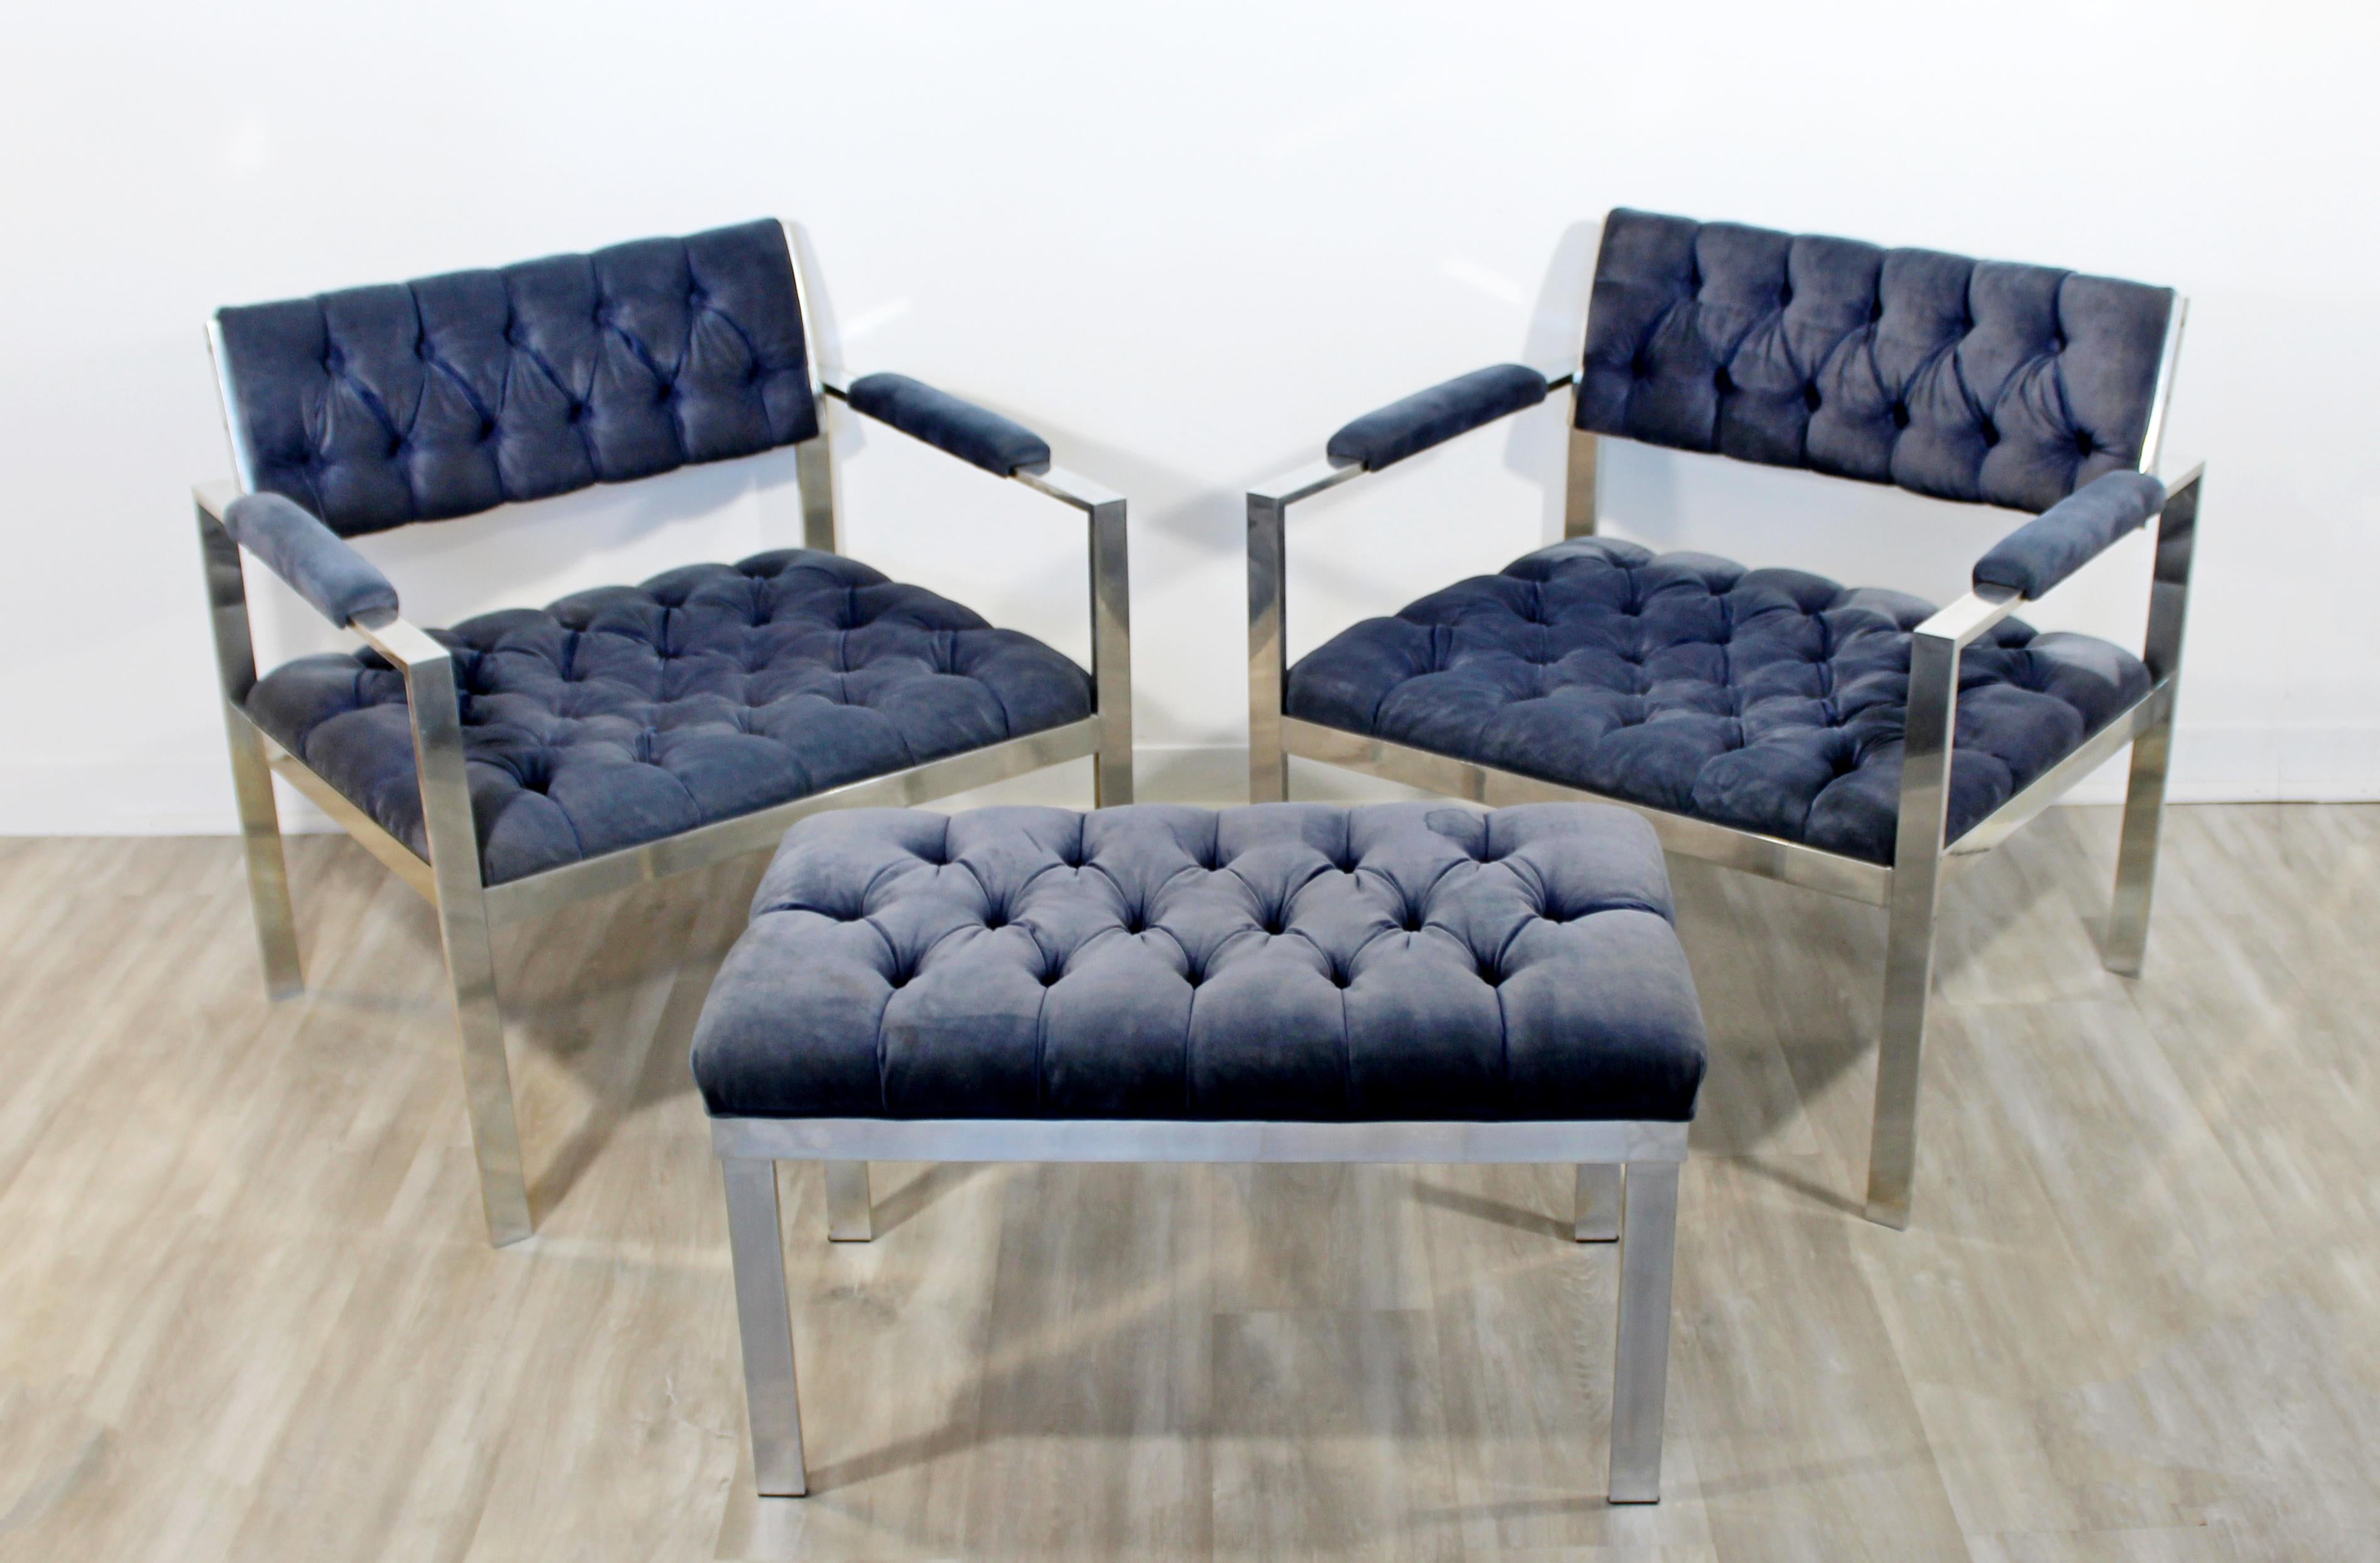 American Mid-Century Modern Pair of Tufted Chrome Lounge Chairs Harvey Probber, 1970s